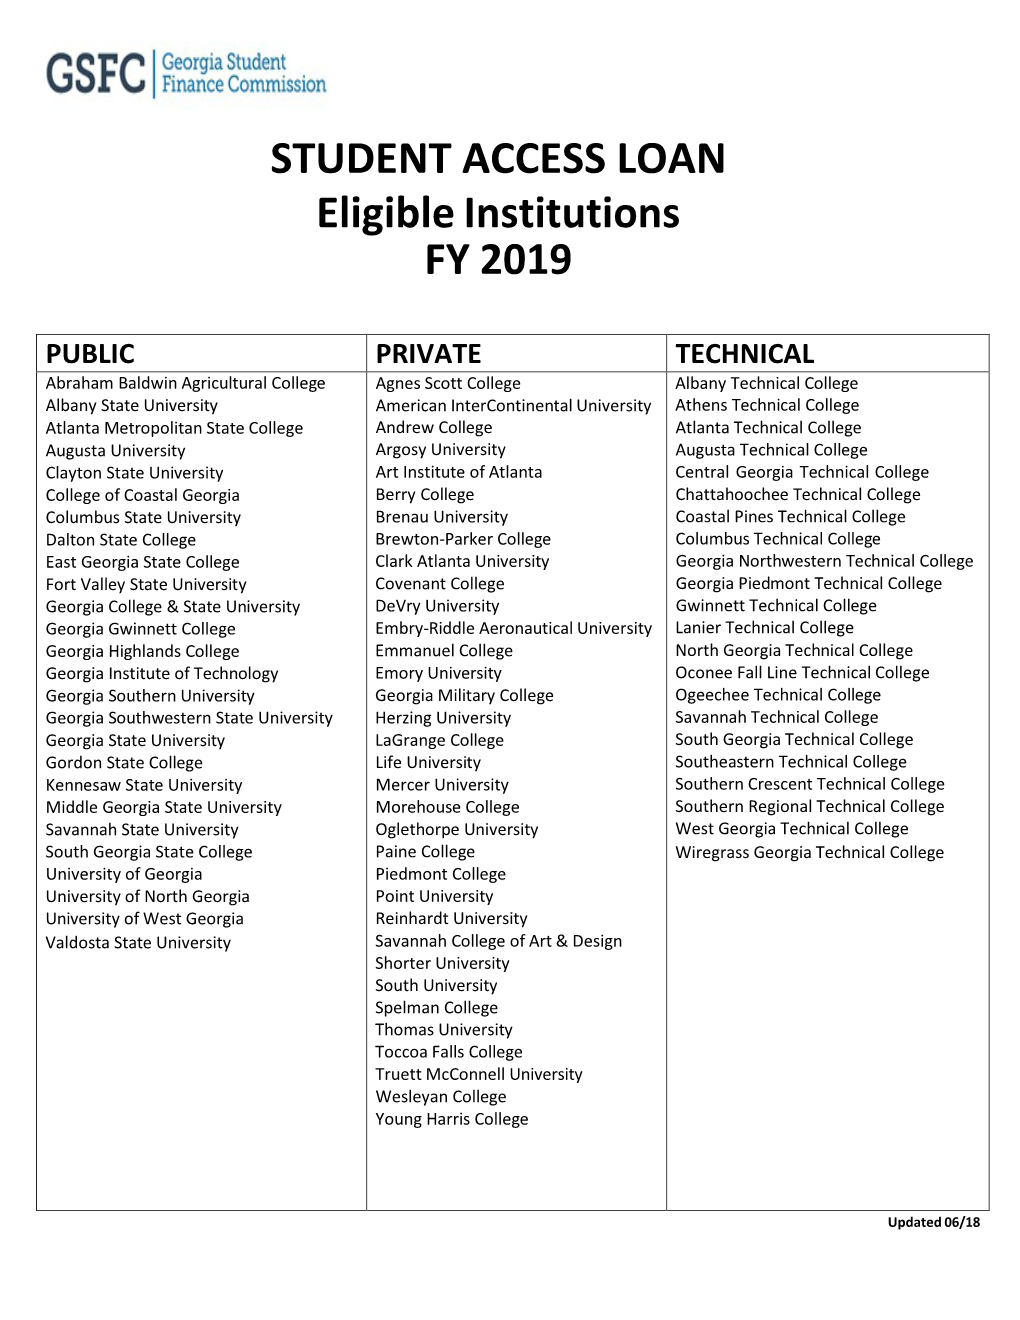 STUDENT ACCESS LOAN Eligible Institutions FY 2019